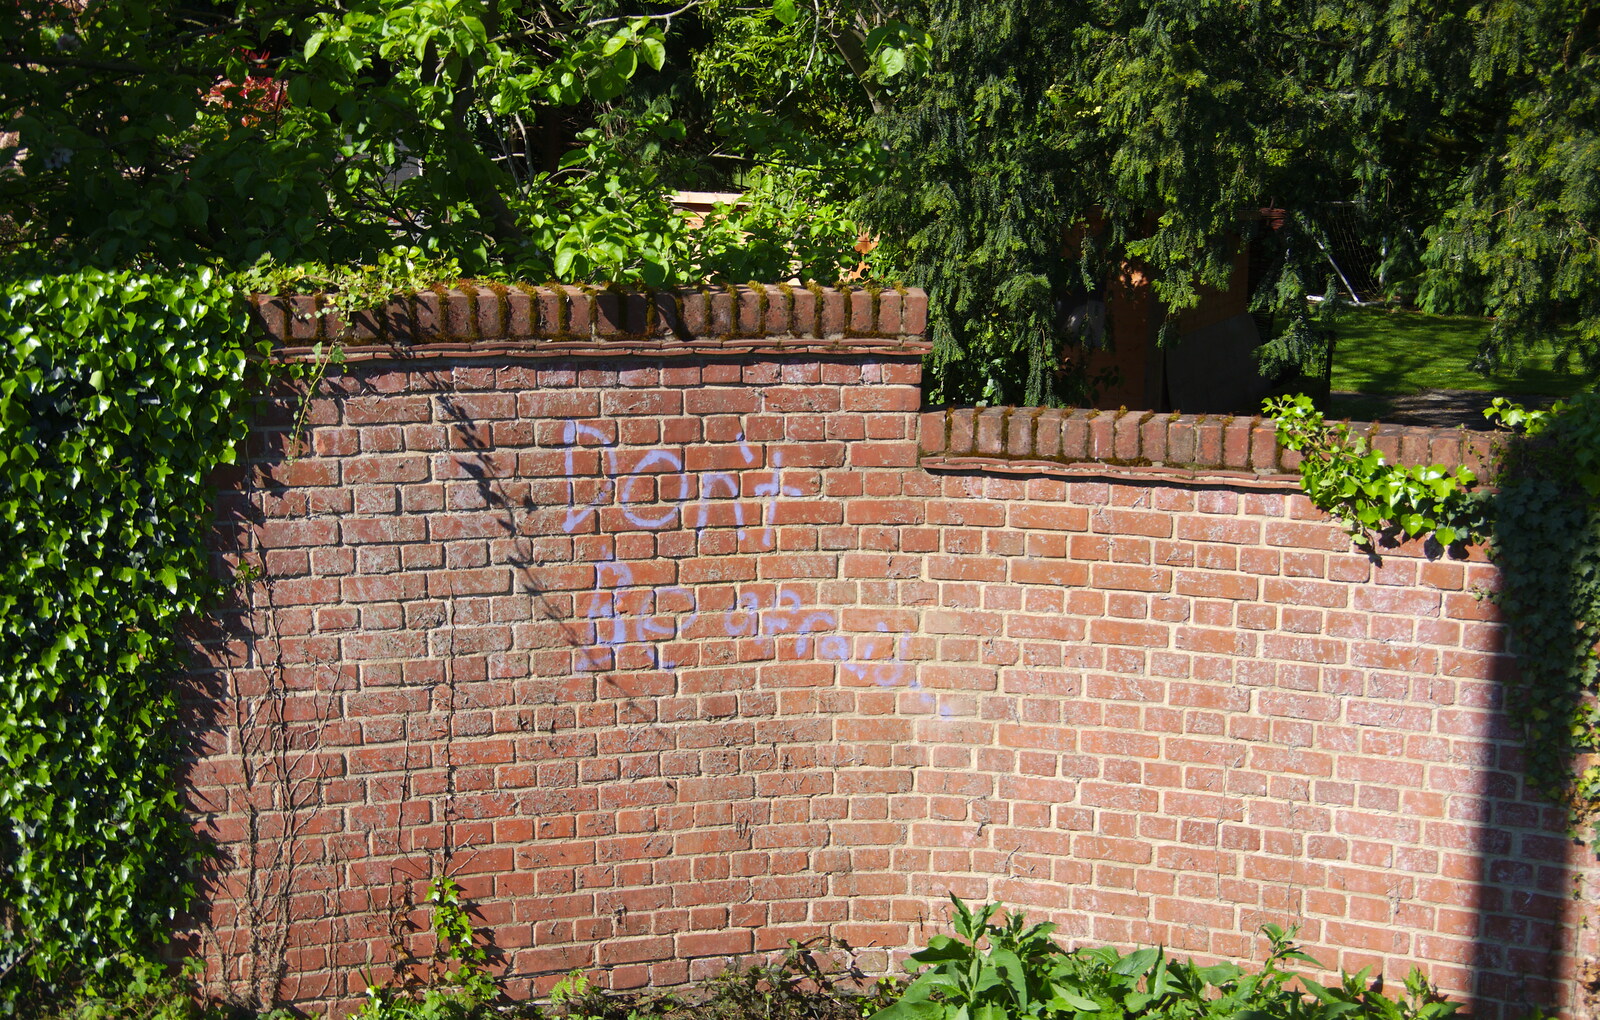 The BSCC Bike Ride 2019, Coggeshall, Essex - 11th May 2019: Someone has sprayed 'don't be afraid' on the wall